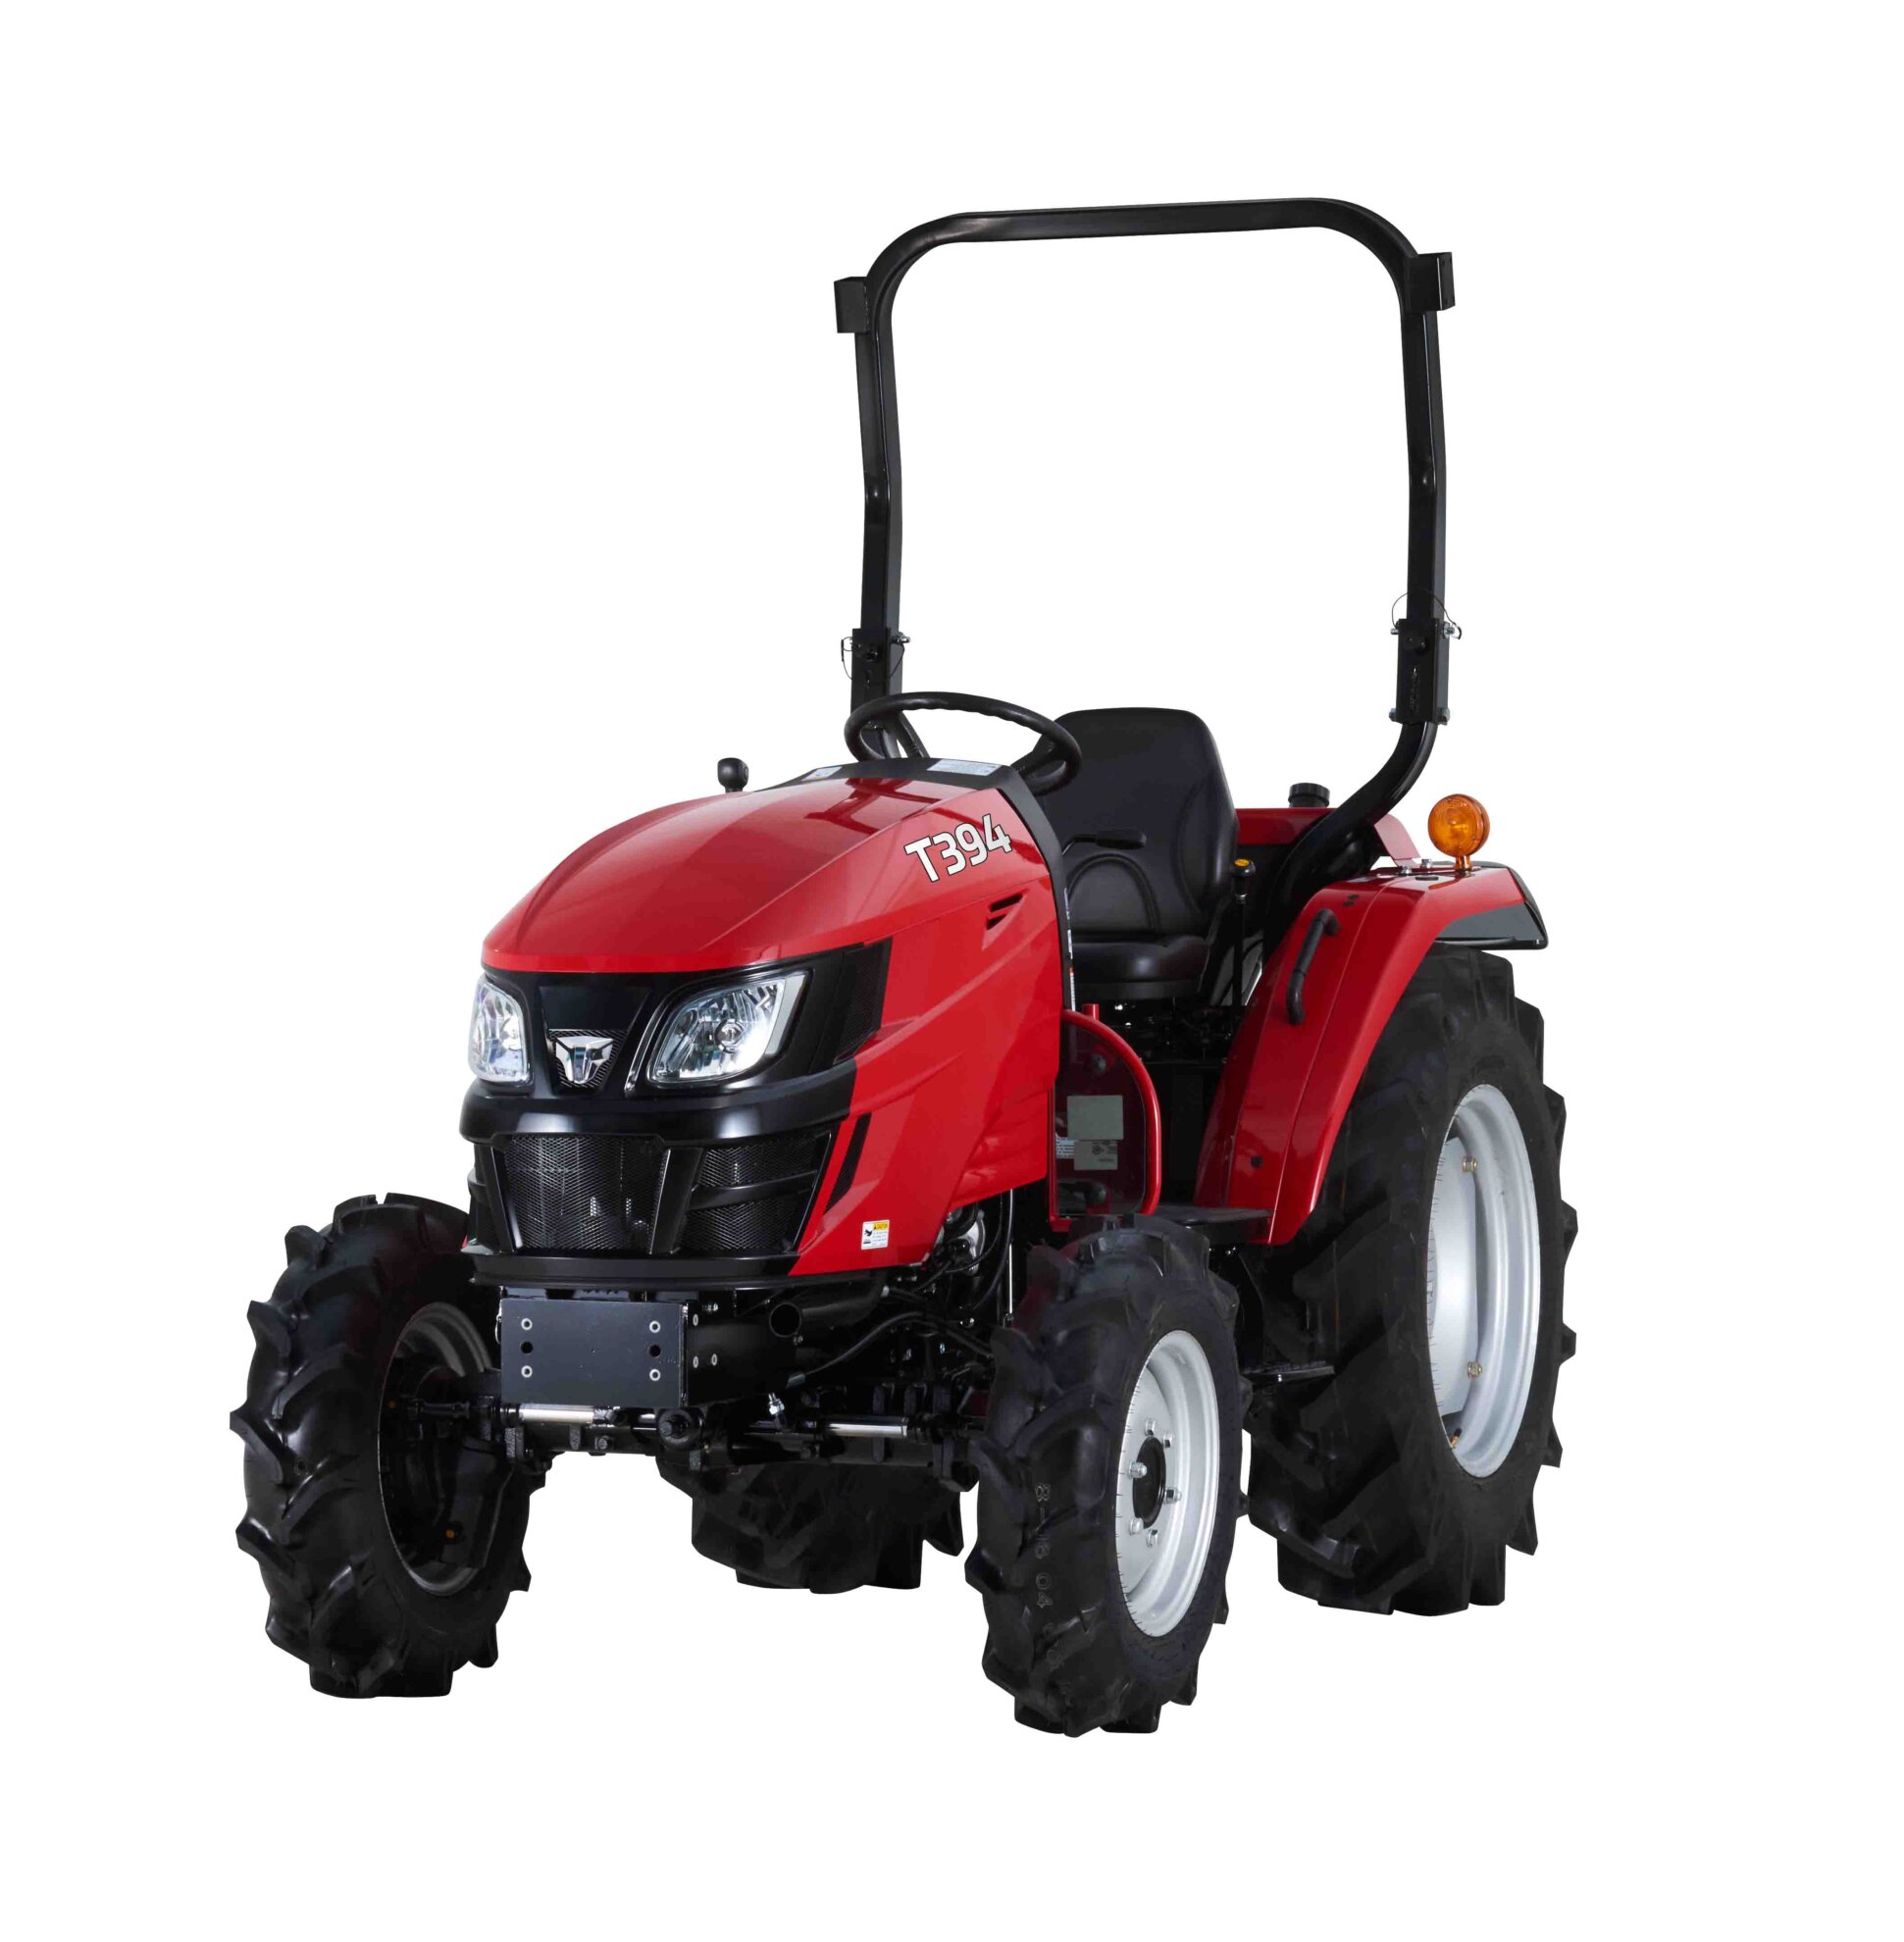 Tym/Branson compact tractor model T395 (Hydr. drive)